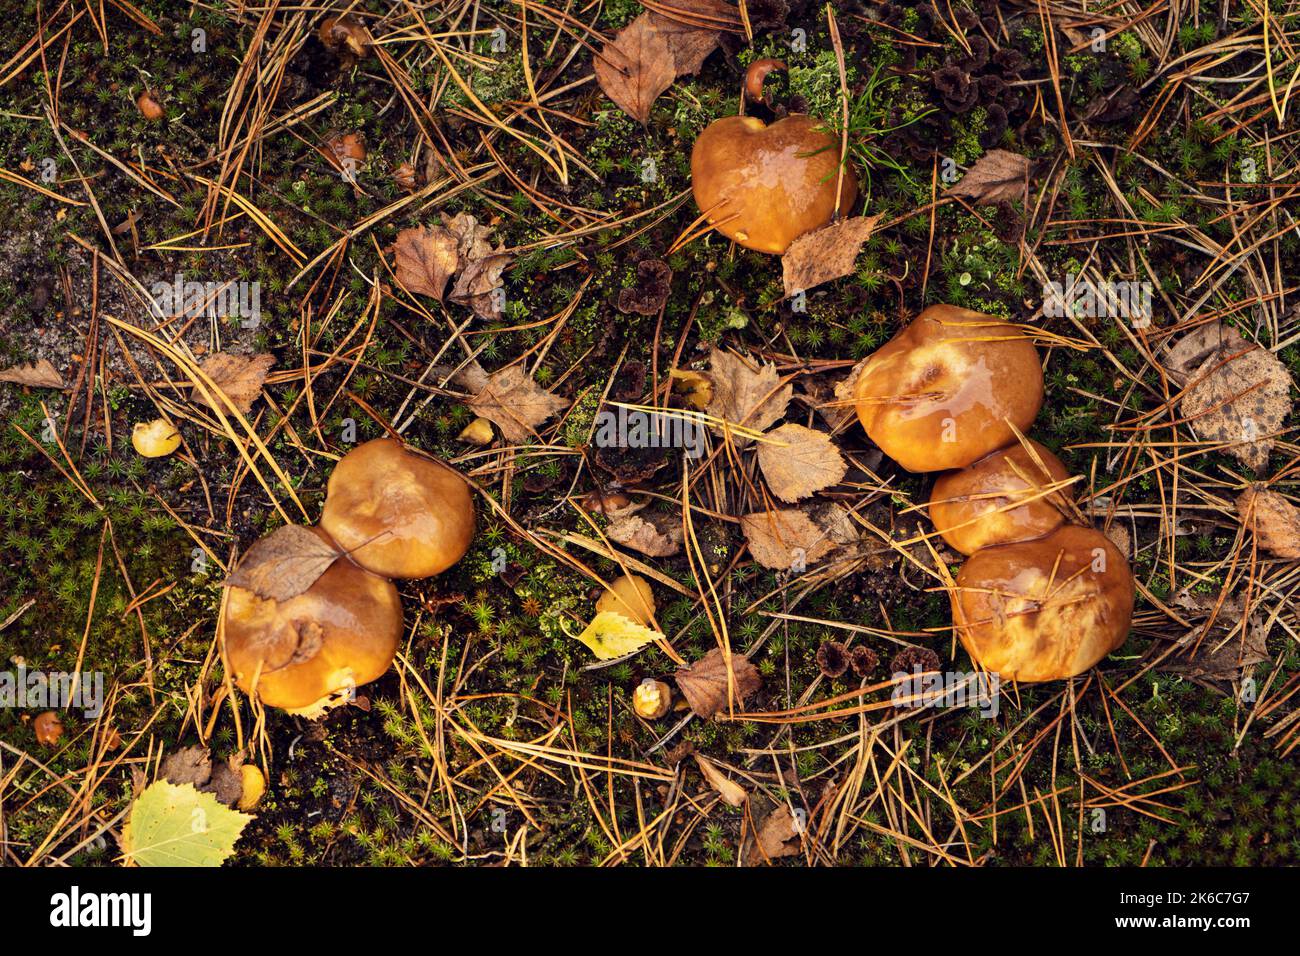 Edible butterdish mushroom in a forest clearing. Stock Photo